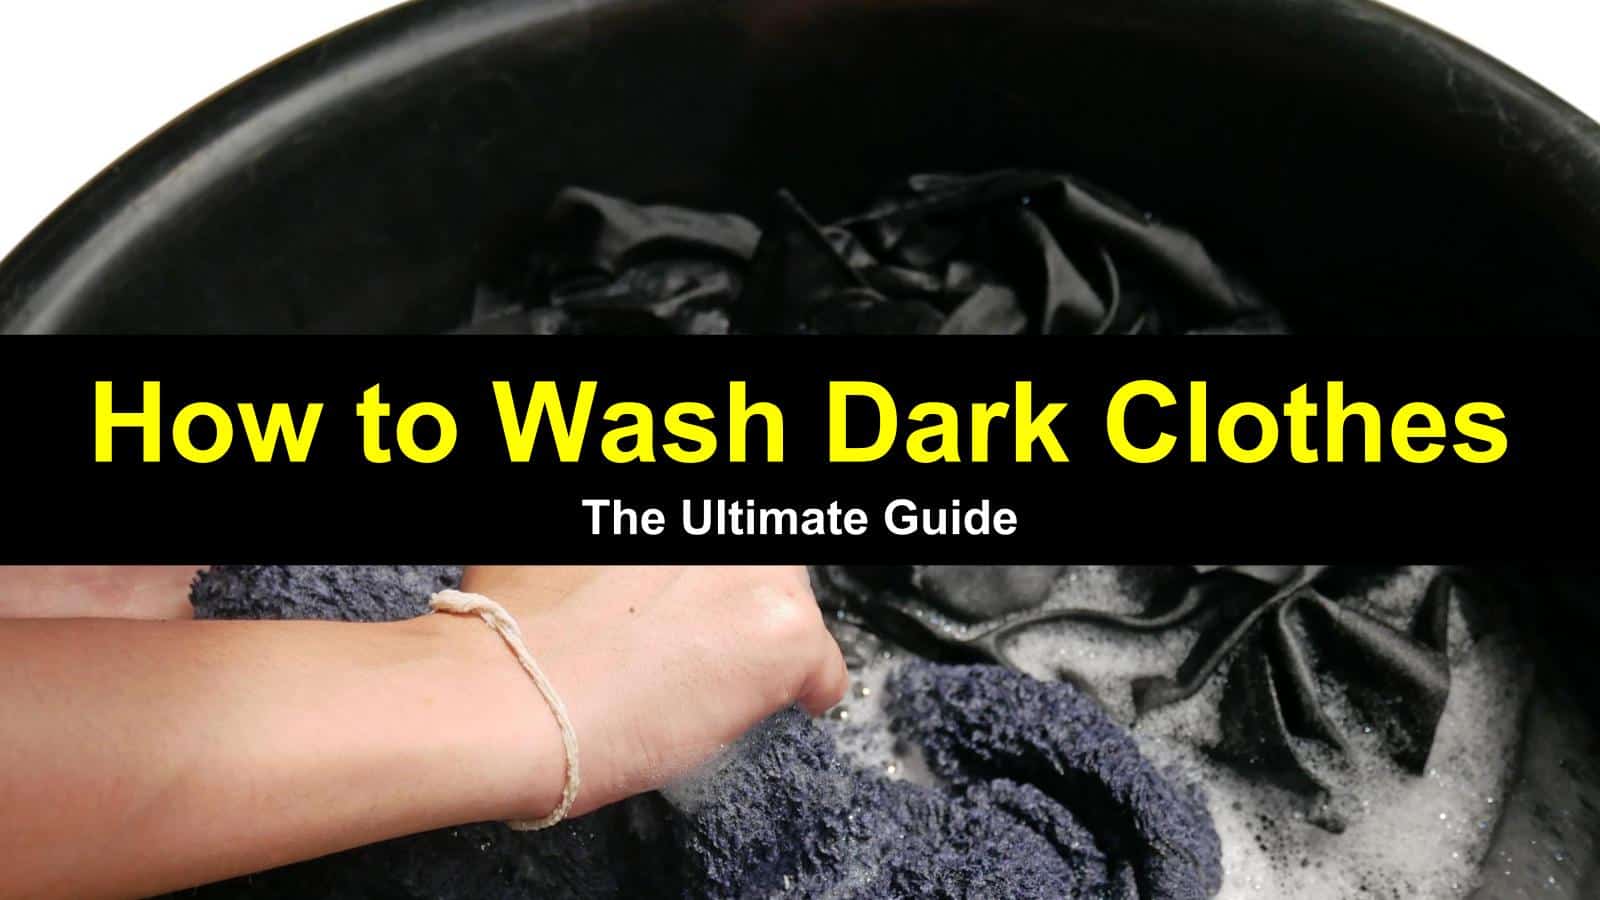 How to Wash Dark Clothes